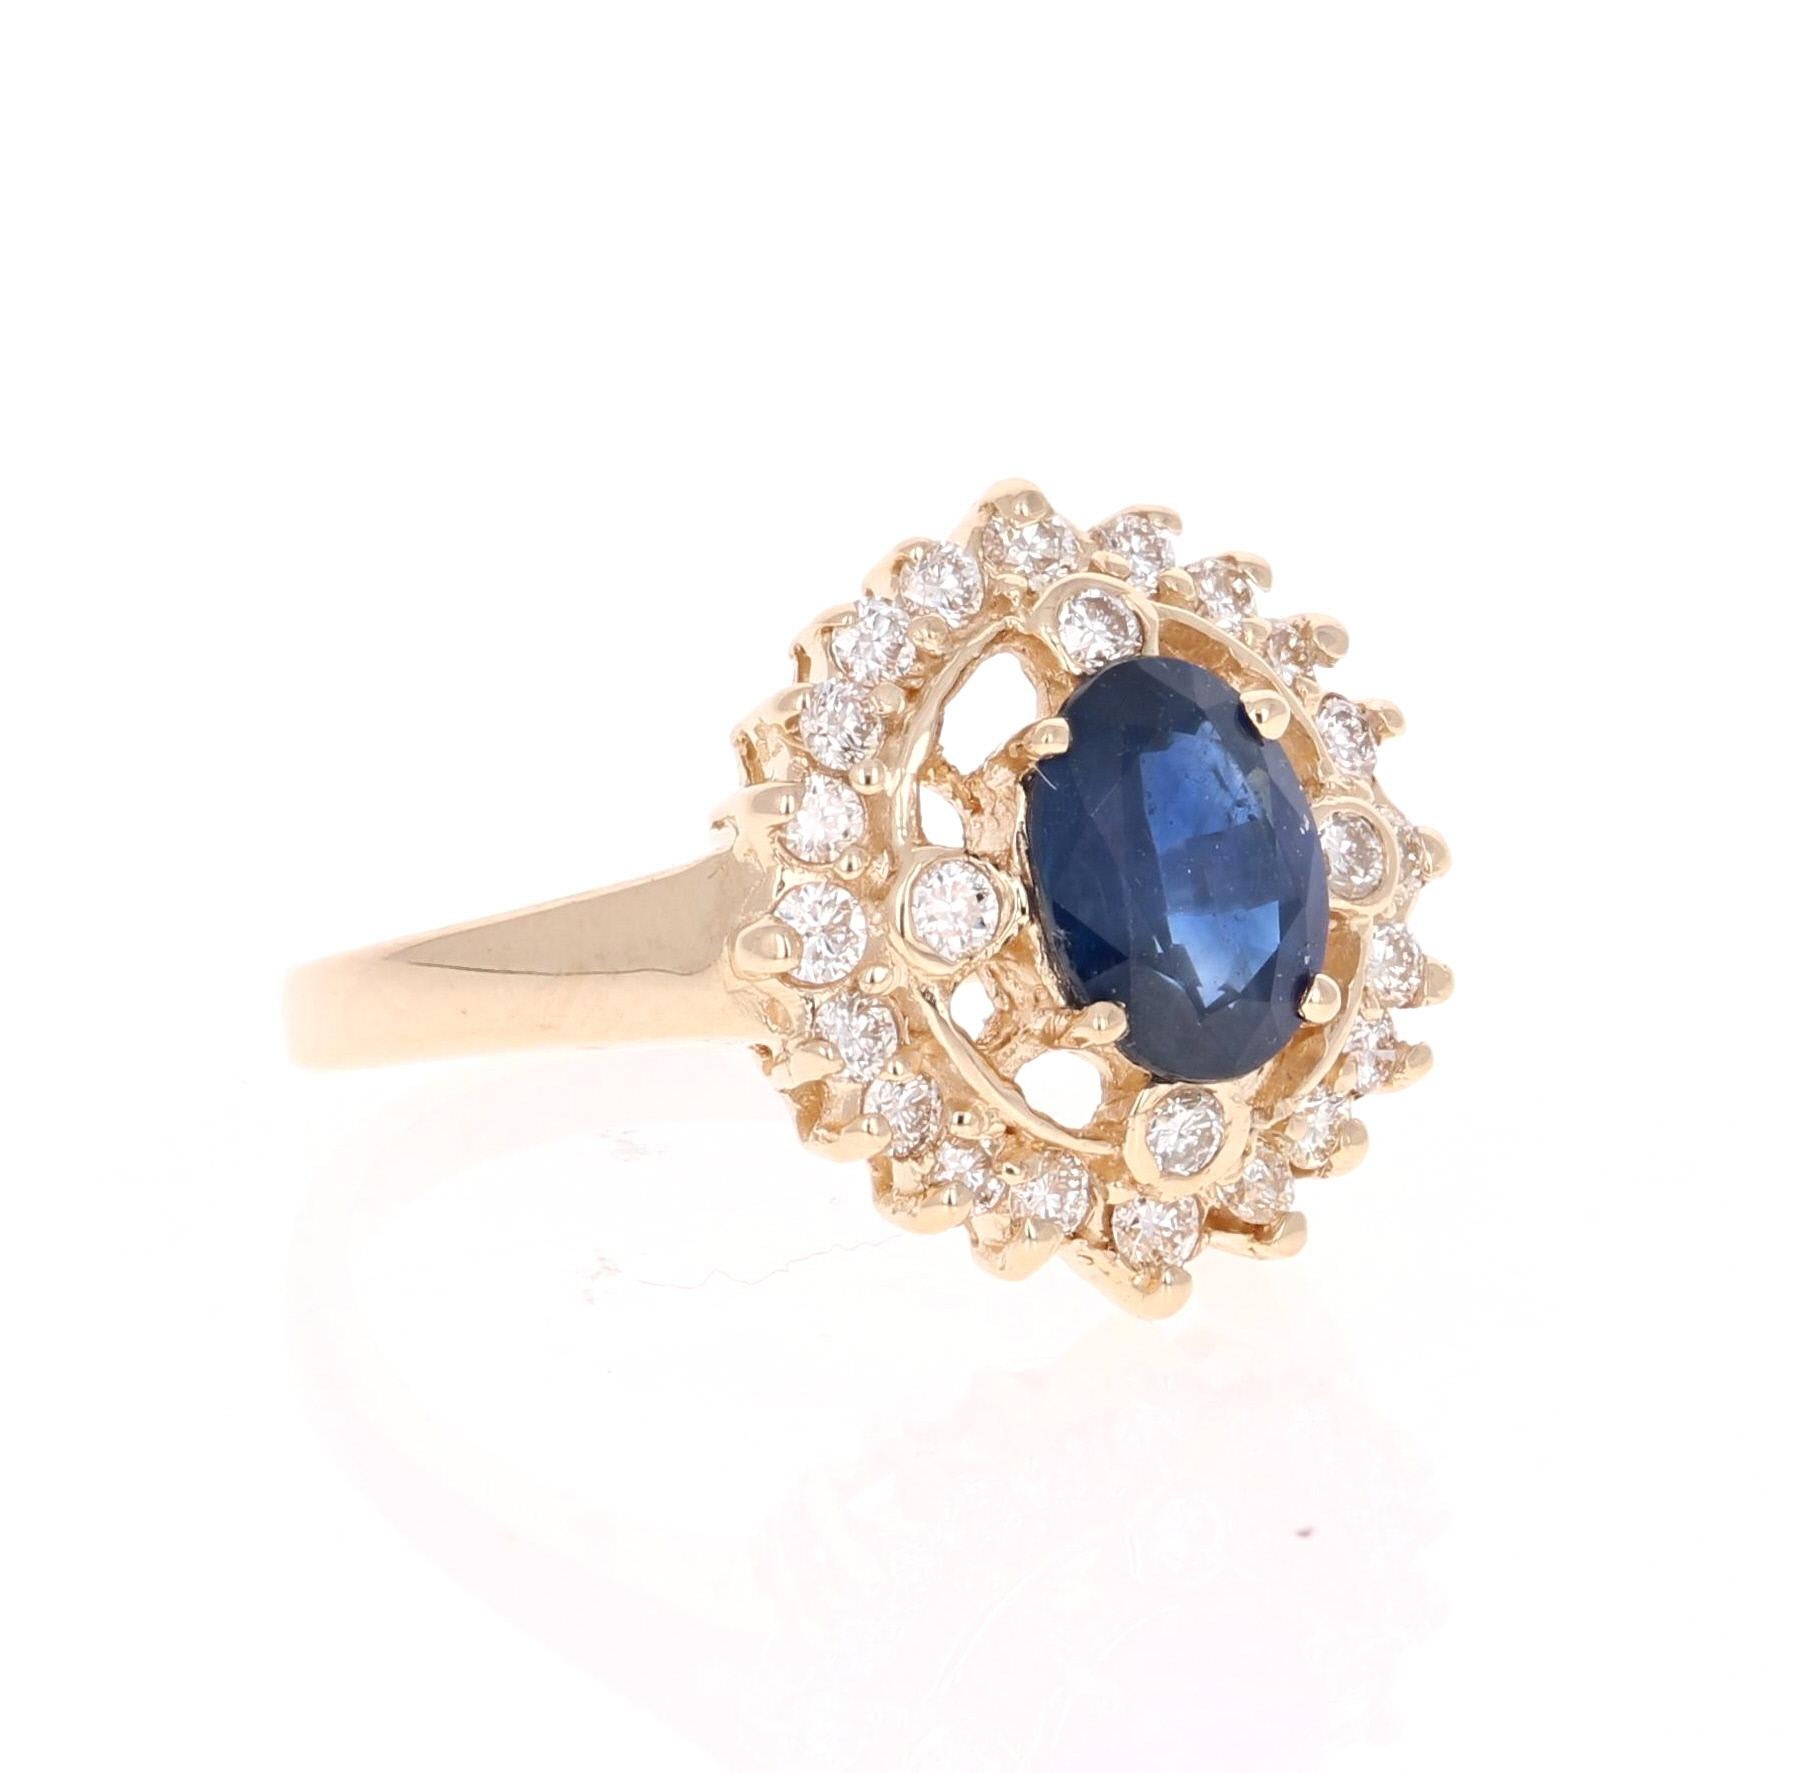 This unique ring is an art-deco inspired ring. It's beauty derives from the brilliant Blue Sapphire that weighs 1.37 Carats and is surrounded by 24 Round Cut Diamonds weighing 0.50 Carats. The clarity and color of the diamonds is VS-H. The total